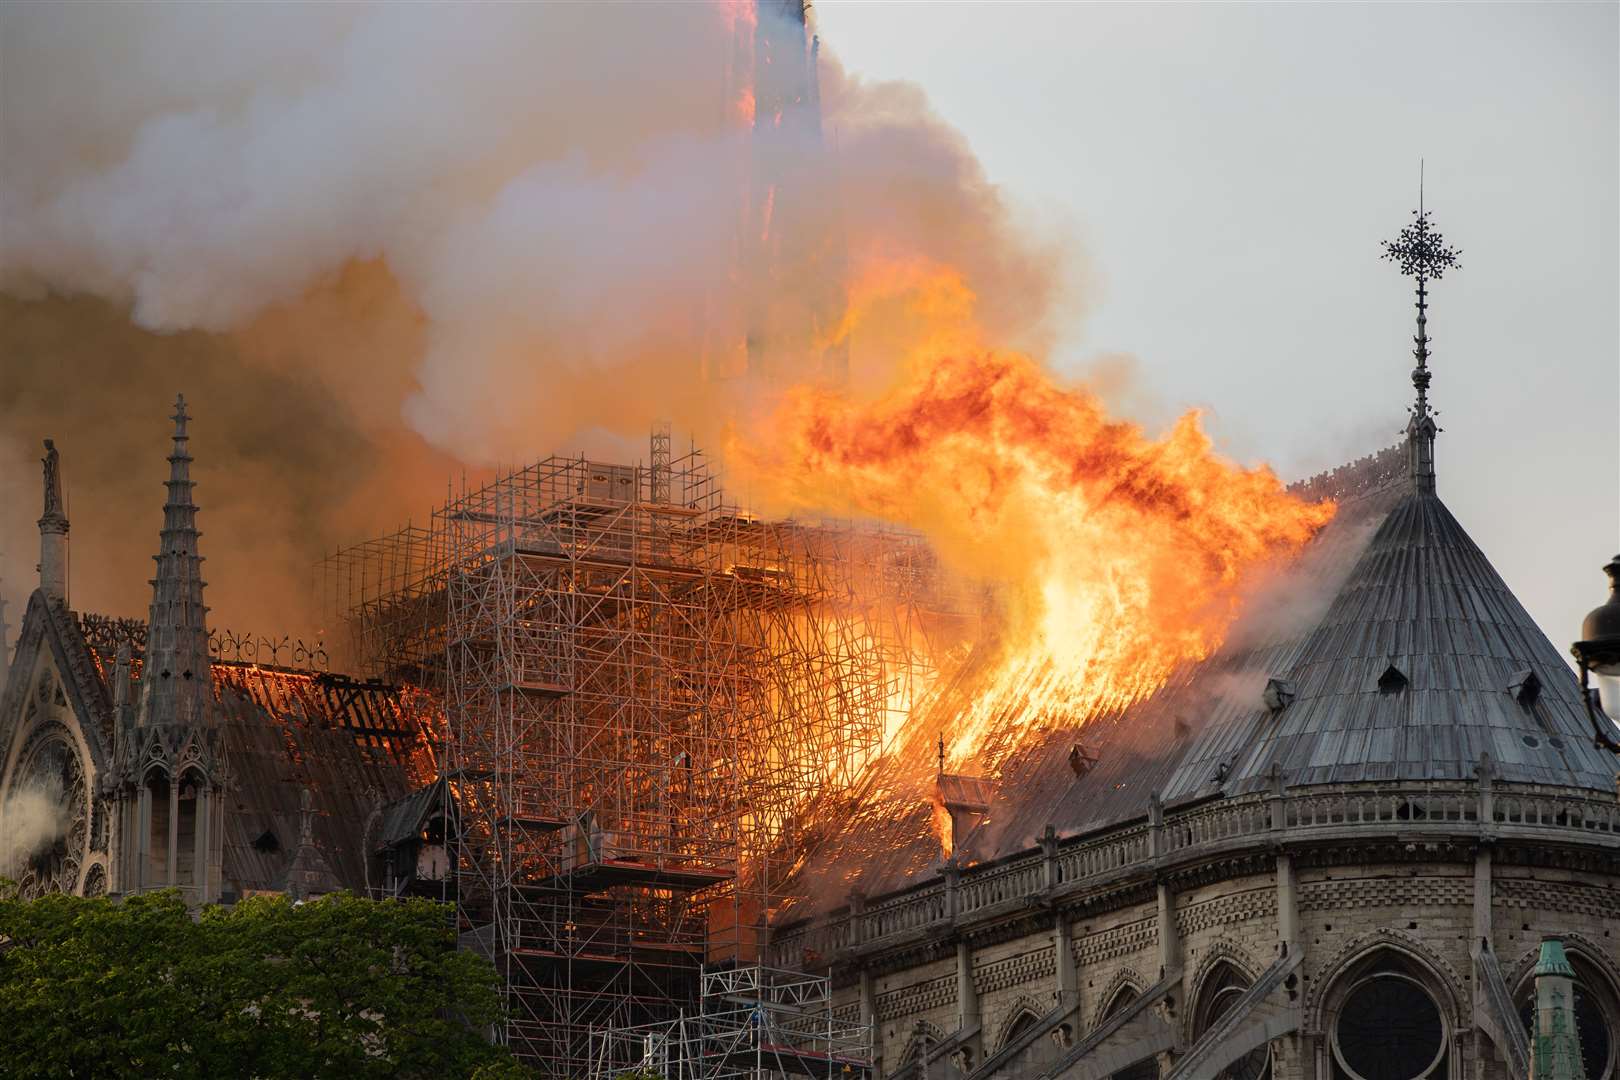 The fire at Notre Dame this week Picture: GAEL DUPRET/Maxppp